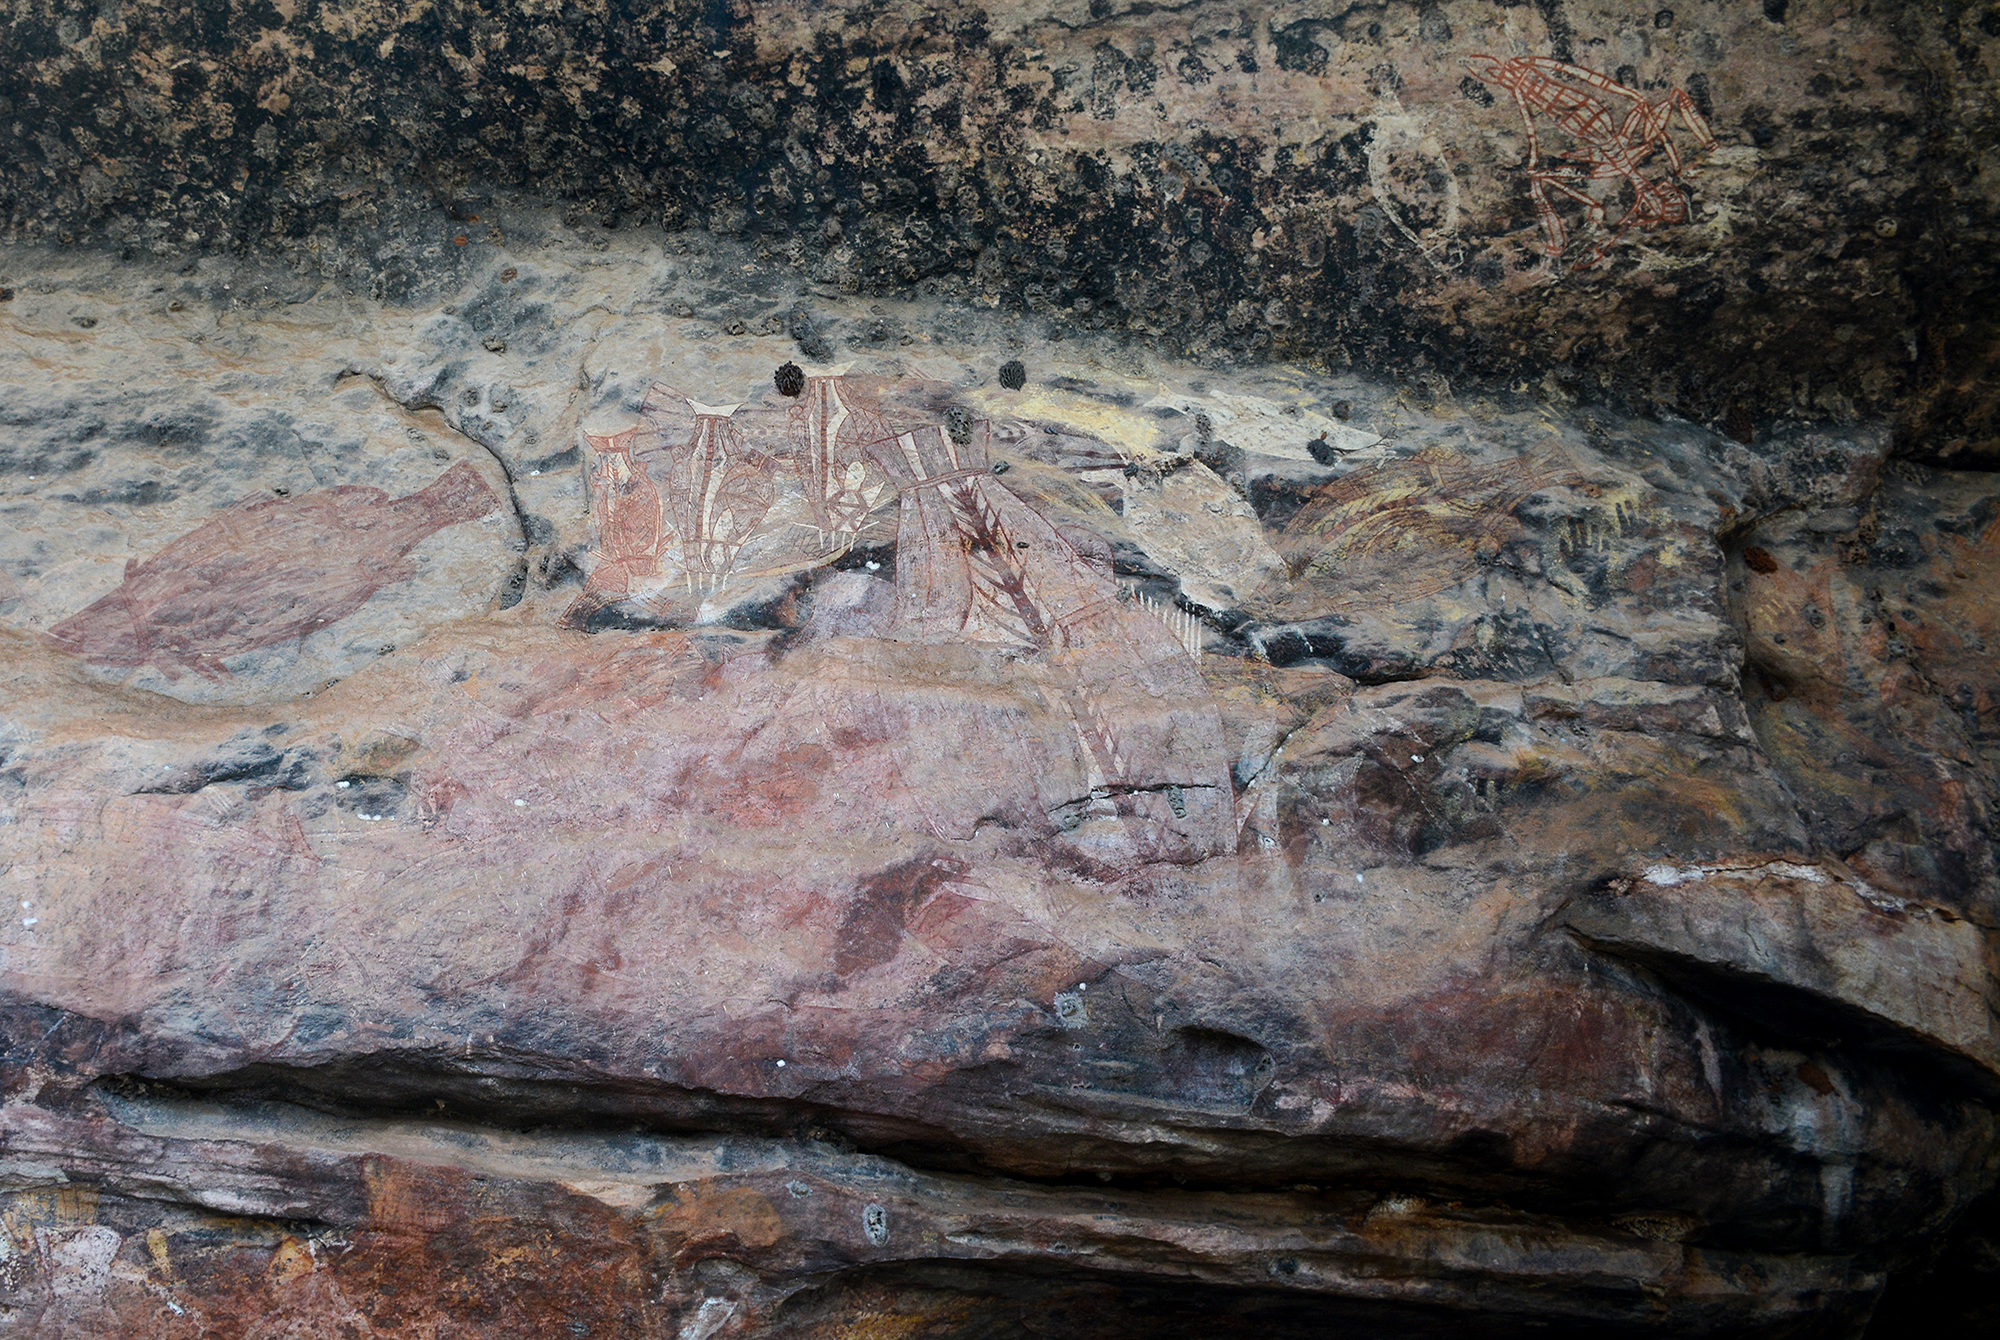 A rock art site to the southeast of Gunbalanya Road. Paintings are barely visible under layers of accumulated dust. If left untreated, this dust can bond to the rock surface forming a crust, exacerbate erosion, or negatively impact the paintings in other ways.